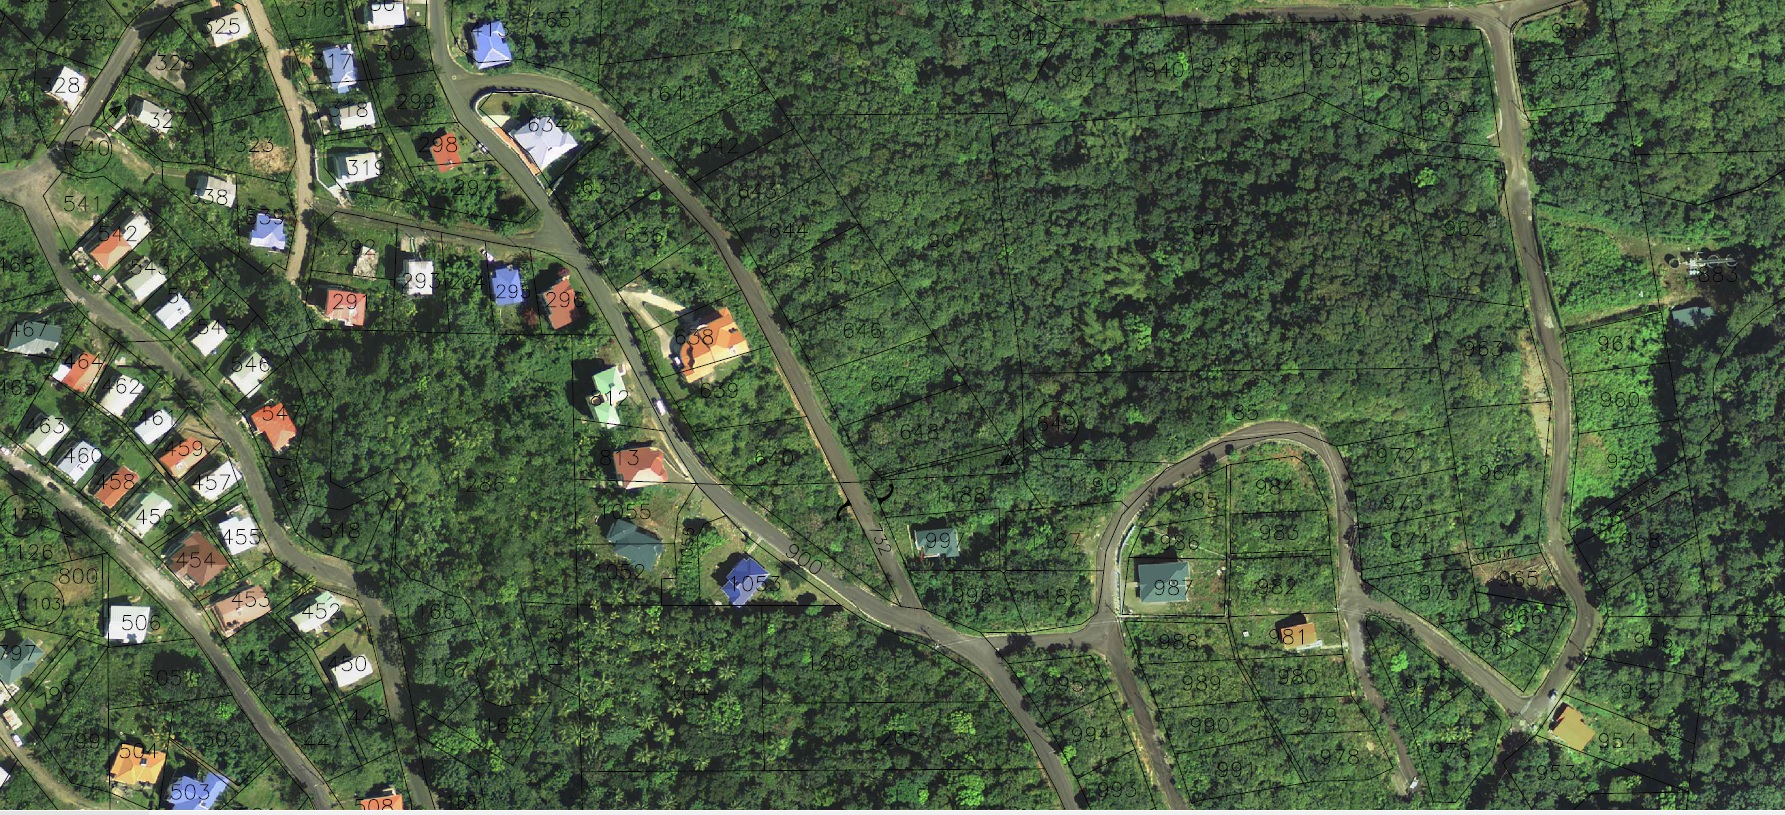 13 Lots For Sale At Carellie Castries